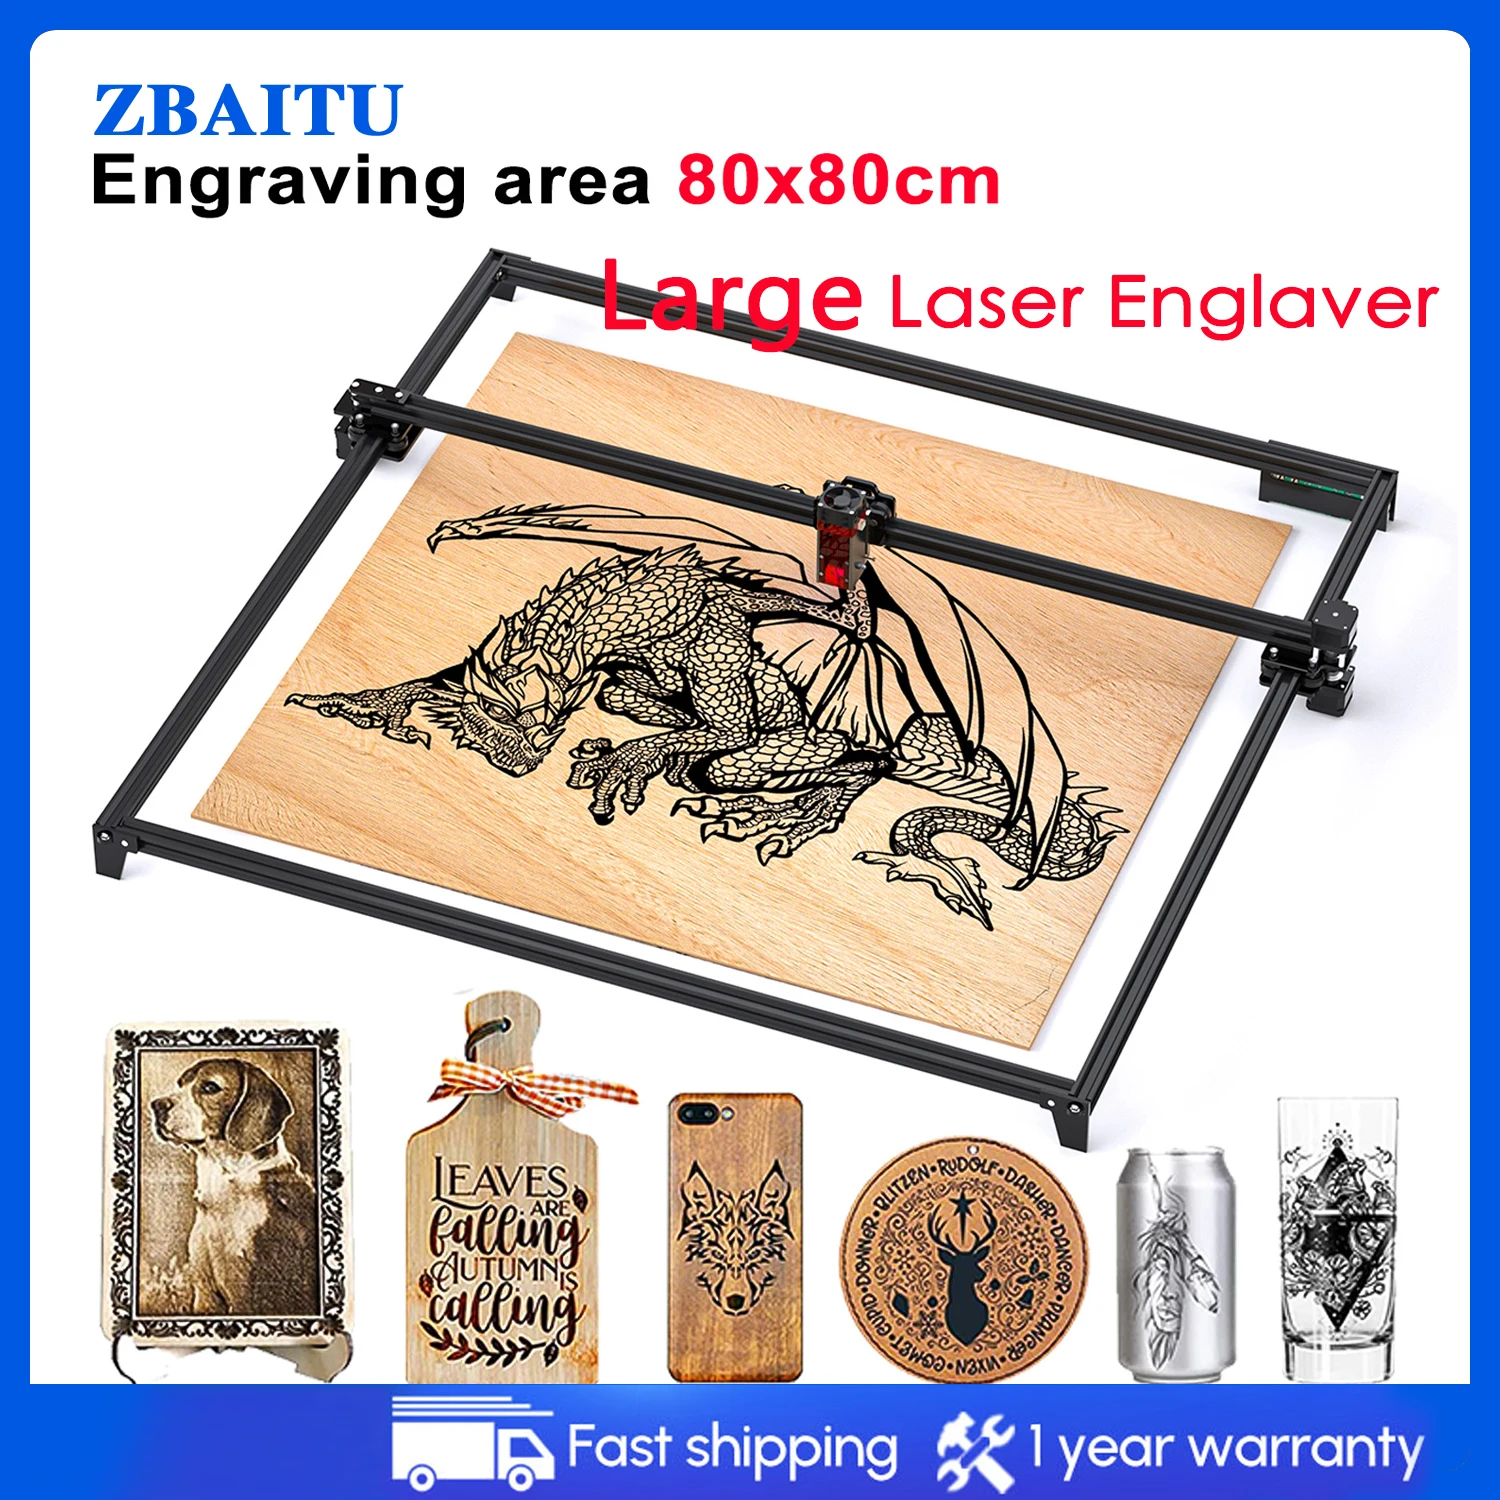 ZBAITU 80*80CM Large Laser Engraver 10w Output Power Diode 80w Engraving Mark Printer Cutter Woodworking Machine CNC Router Tool